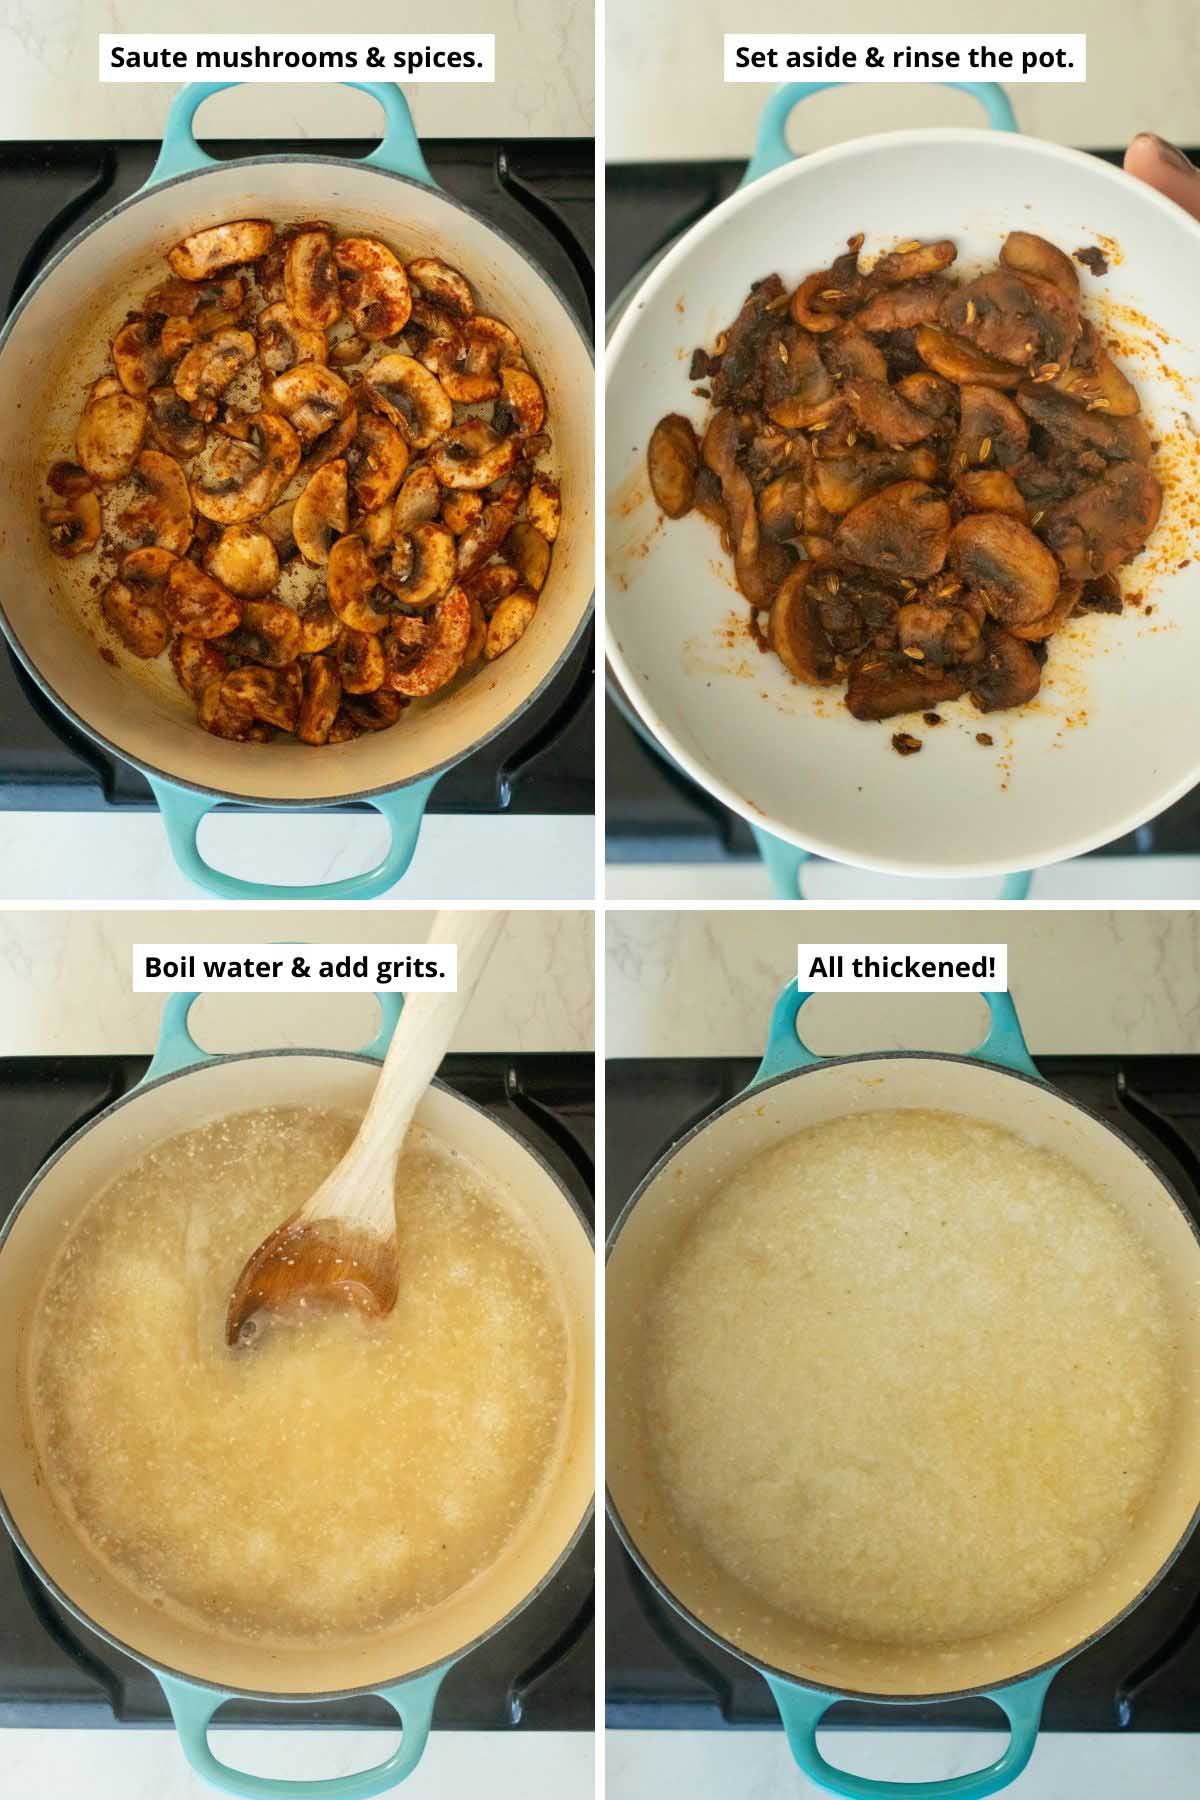 image collage showing the mushrooms before and after cooking and the grits in the pan before and after boiling